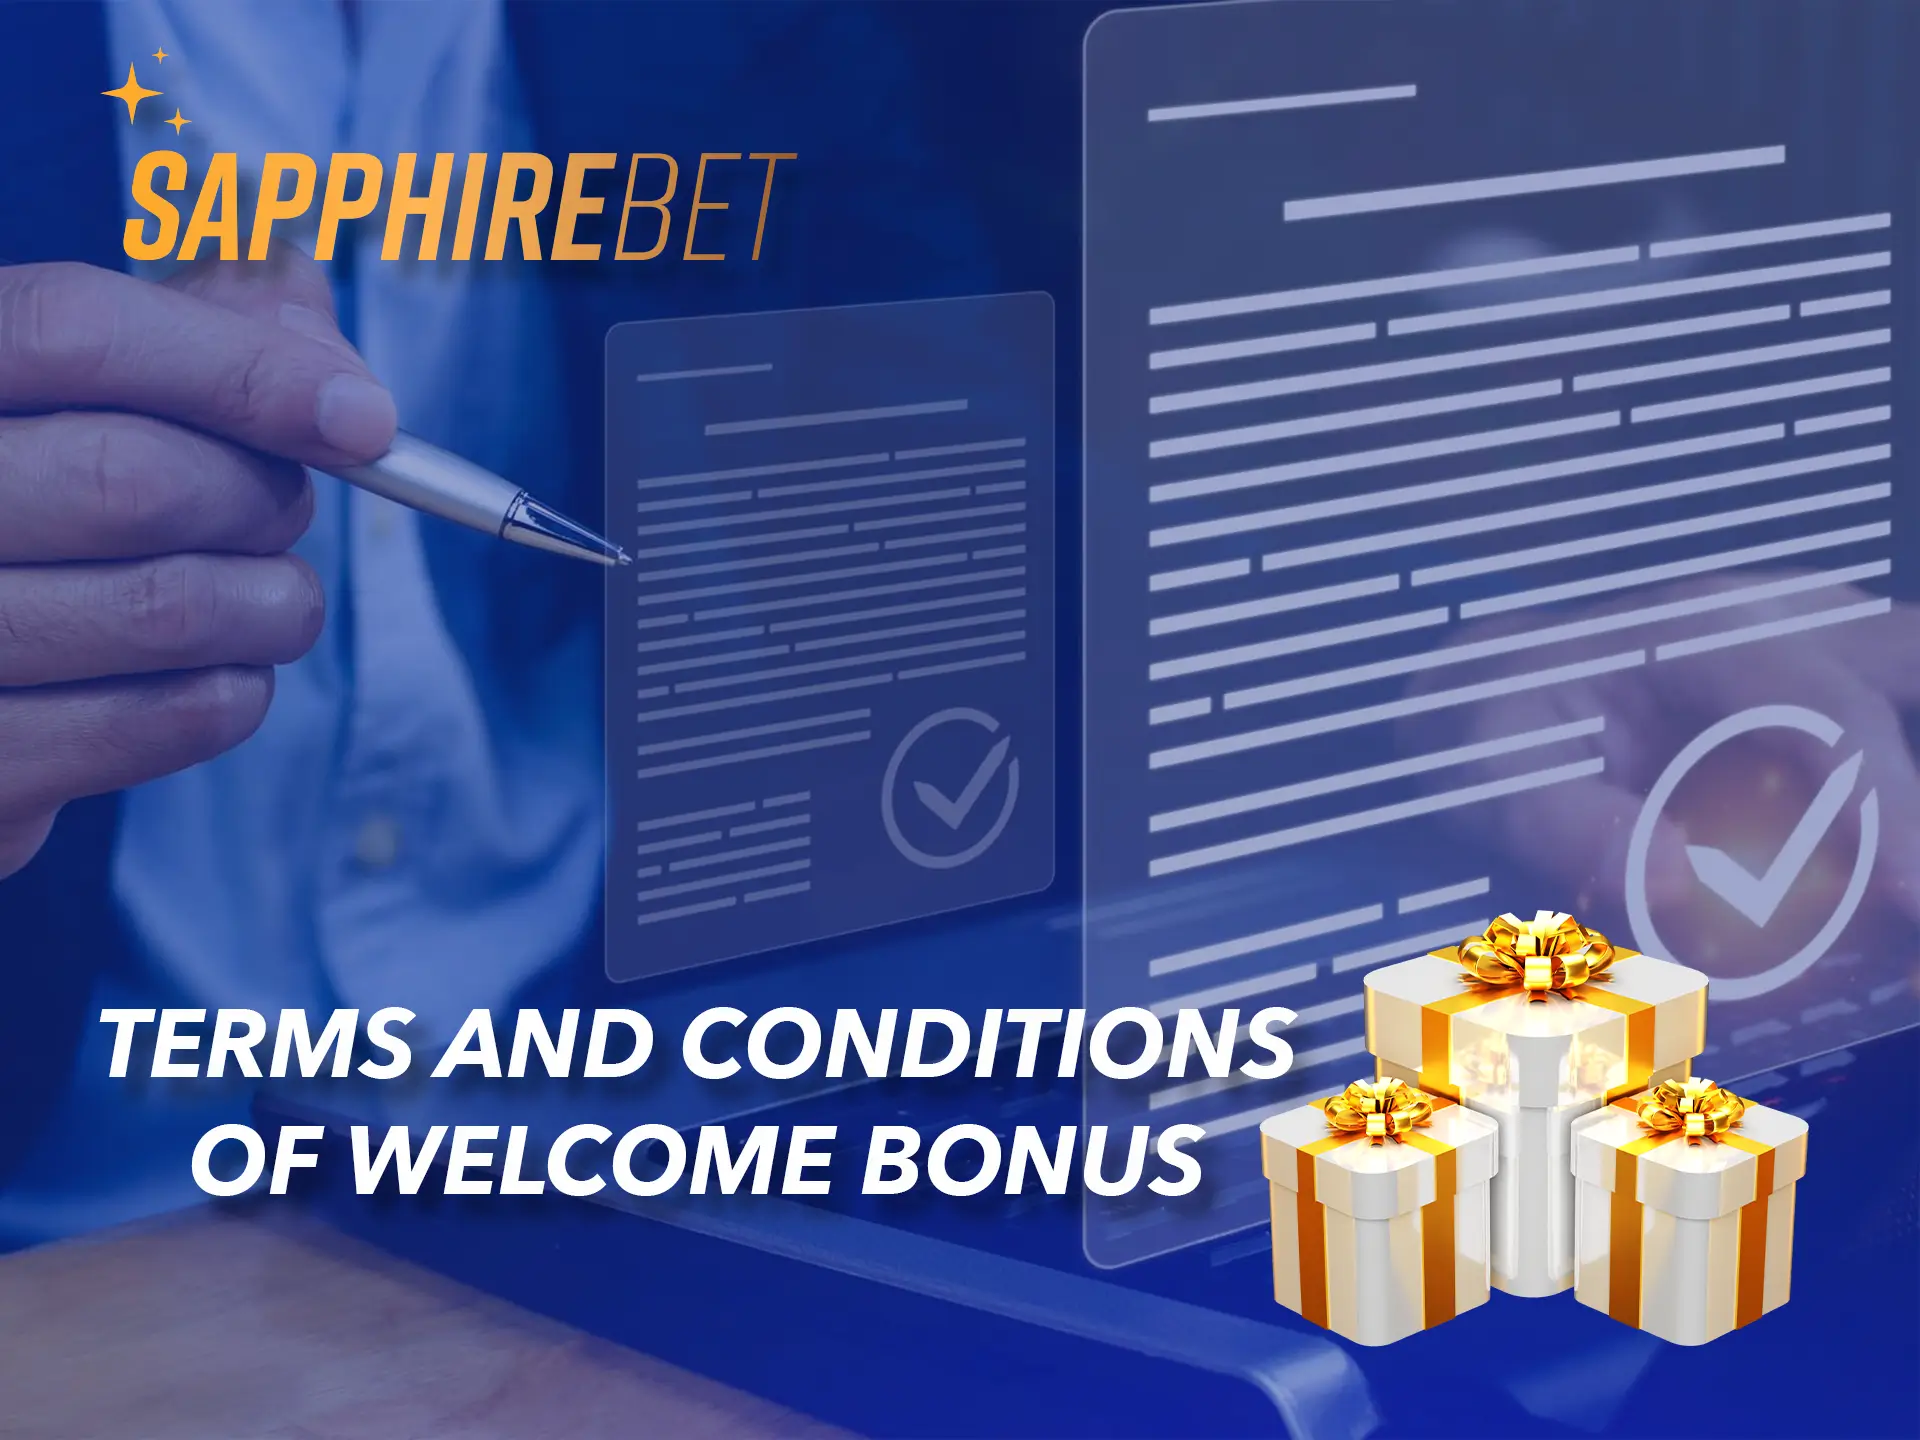 Carefully read the rules of participation in the bonus programme from Sapphirebet.